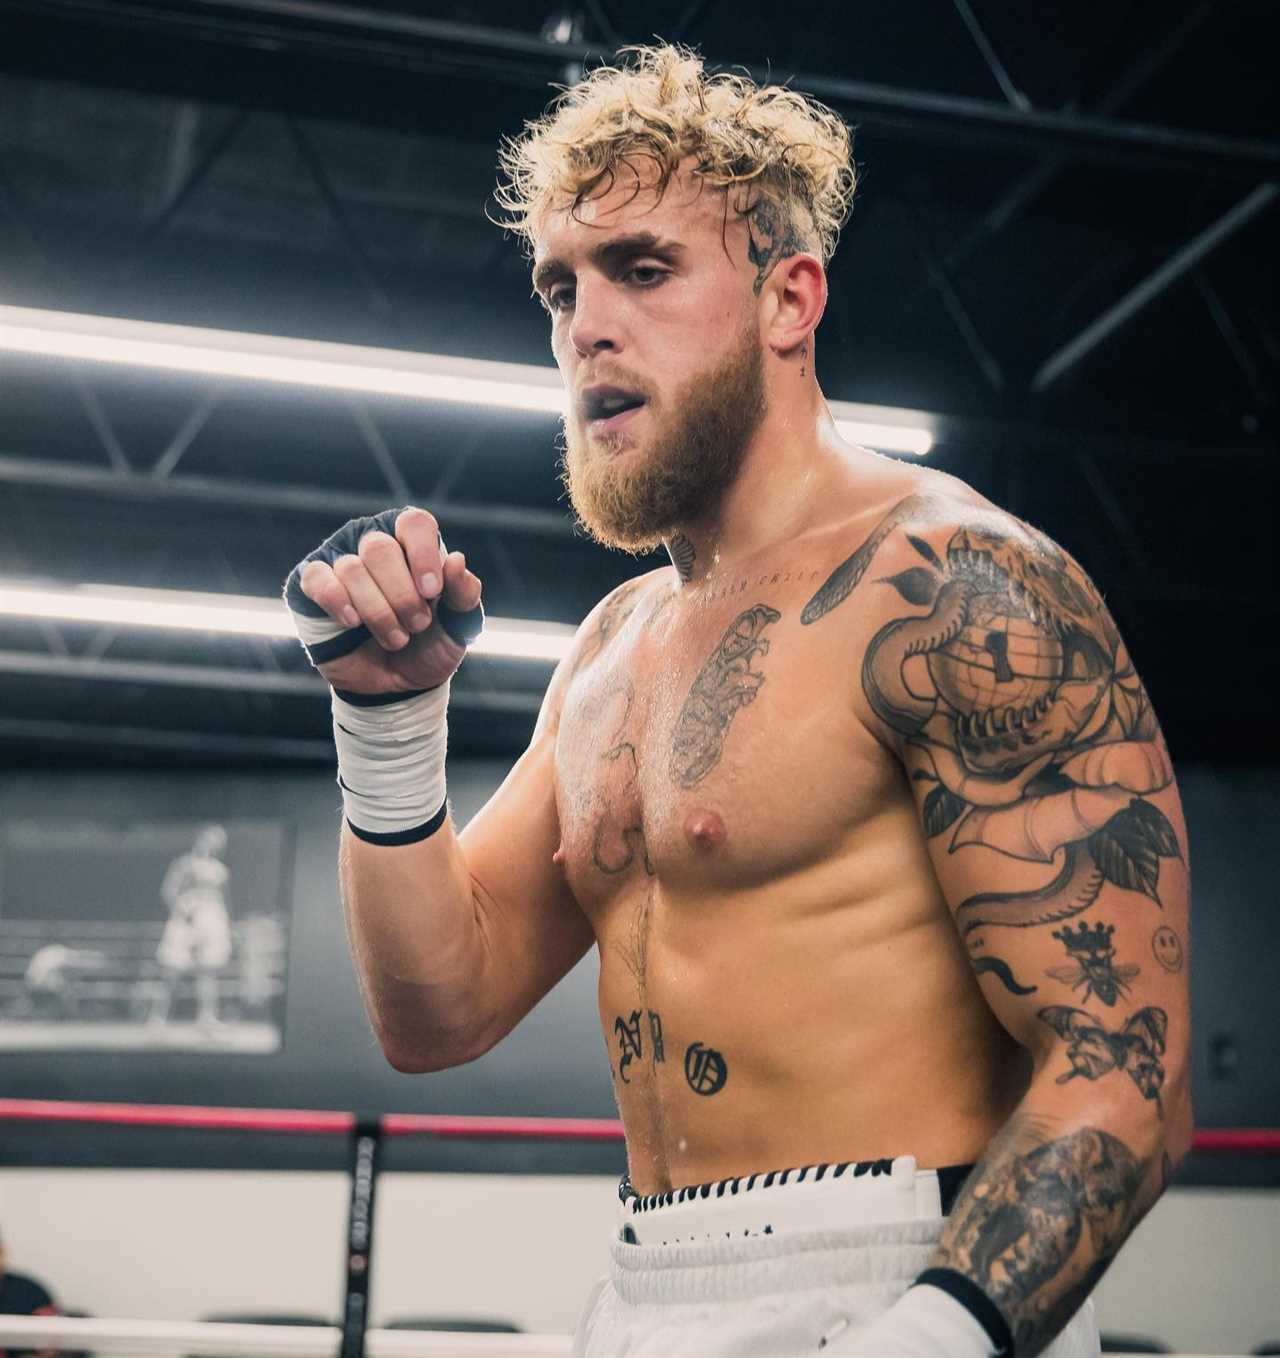 Jake Paul's sparring partner KICKED AWAY FROM THE GYM AFTER a 'heated session' with YouTuber, in preparation for Tommy Fury fight